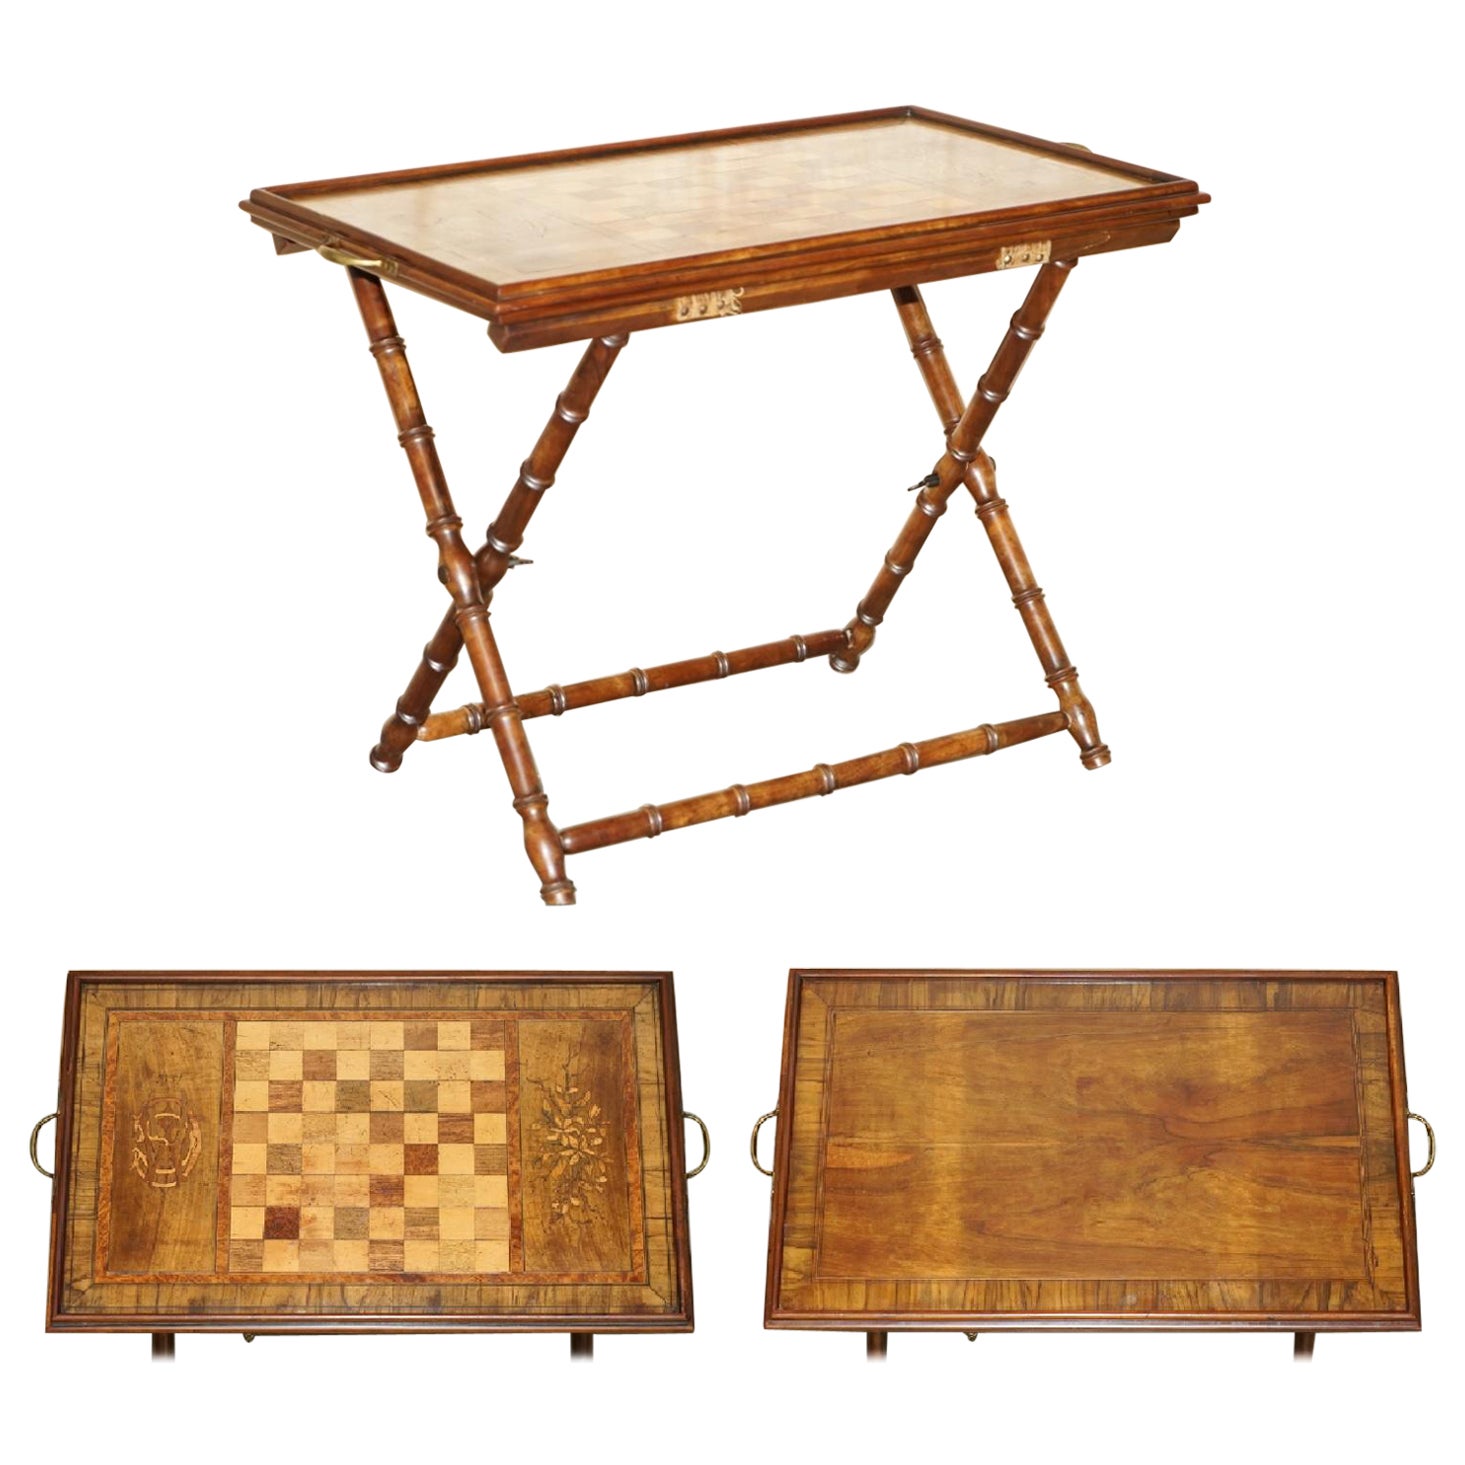 1885 DATED ANTiQUE WALNUT HARDWOOD CHESSBOARD FOLDING GAMES CHESS TRAY TABLE For Sale